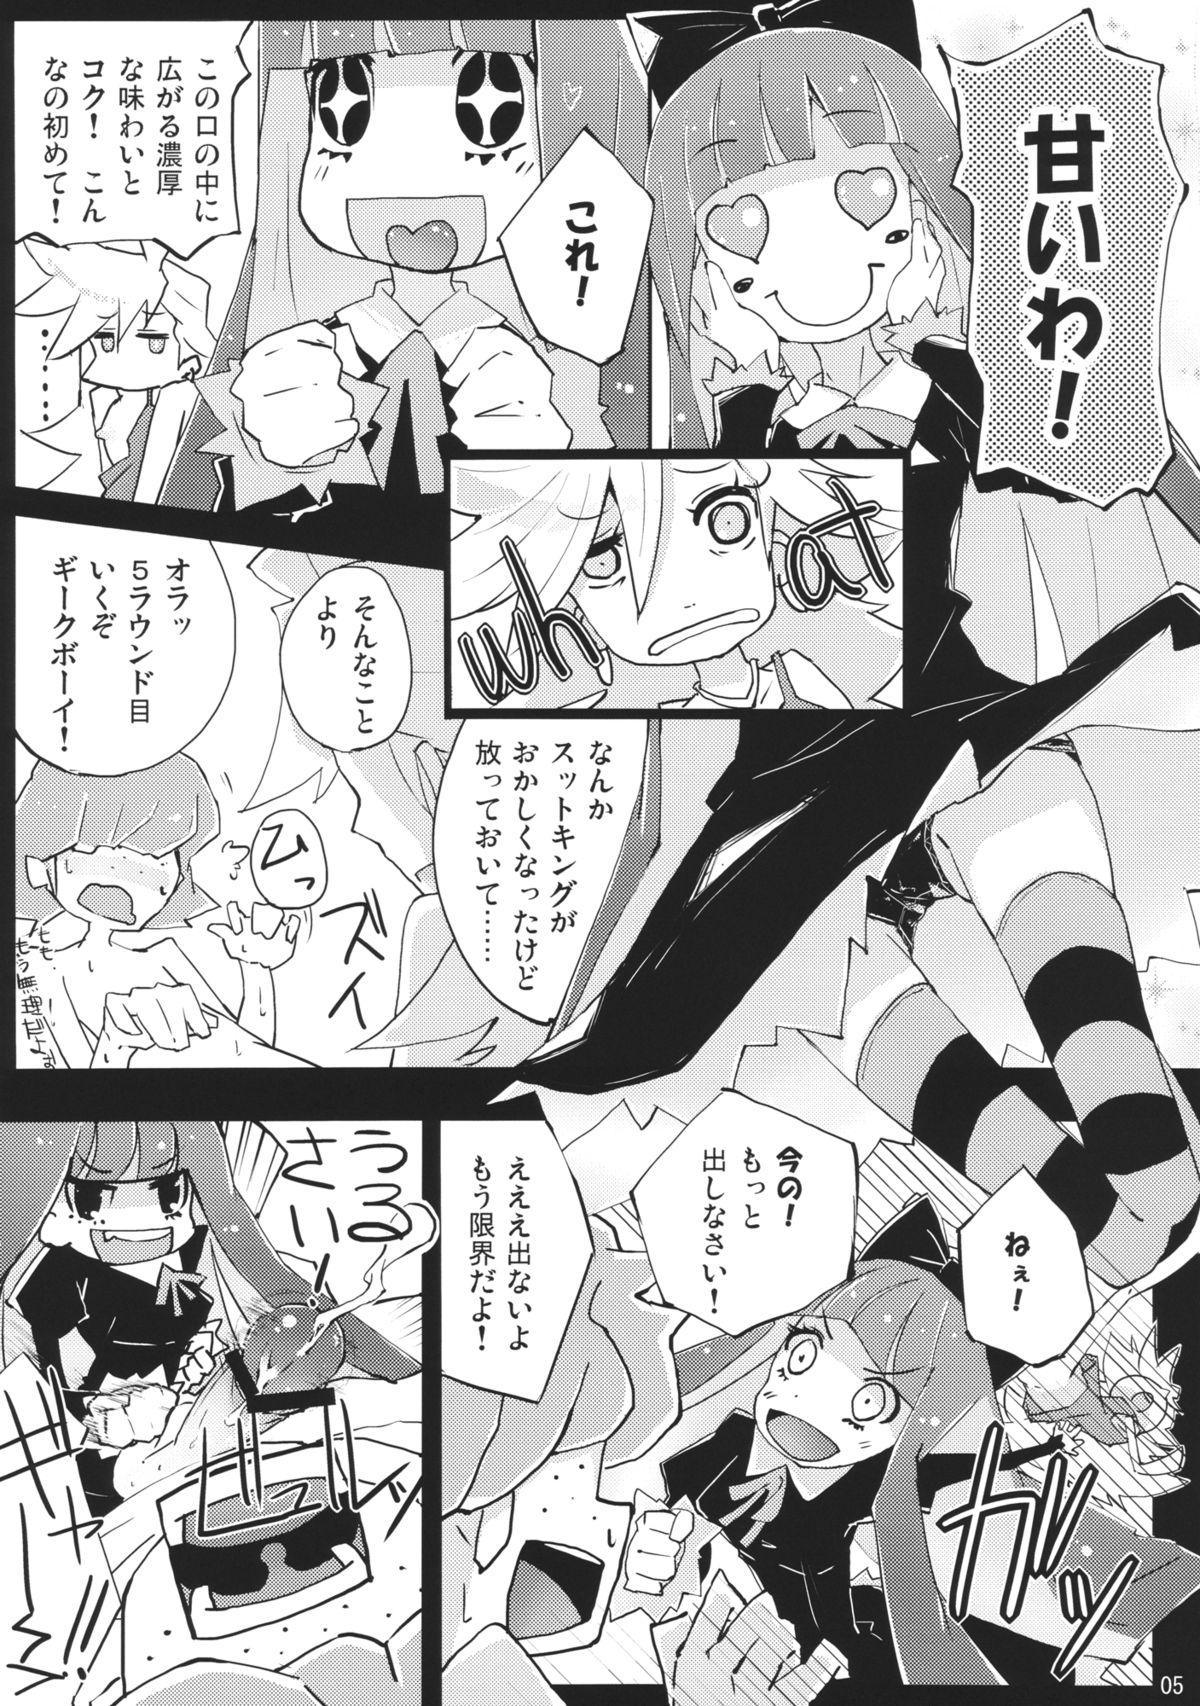 Salope Taruta no Leche - Panty and stocking with garterbelt Gay College - Page 5